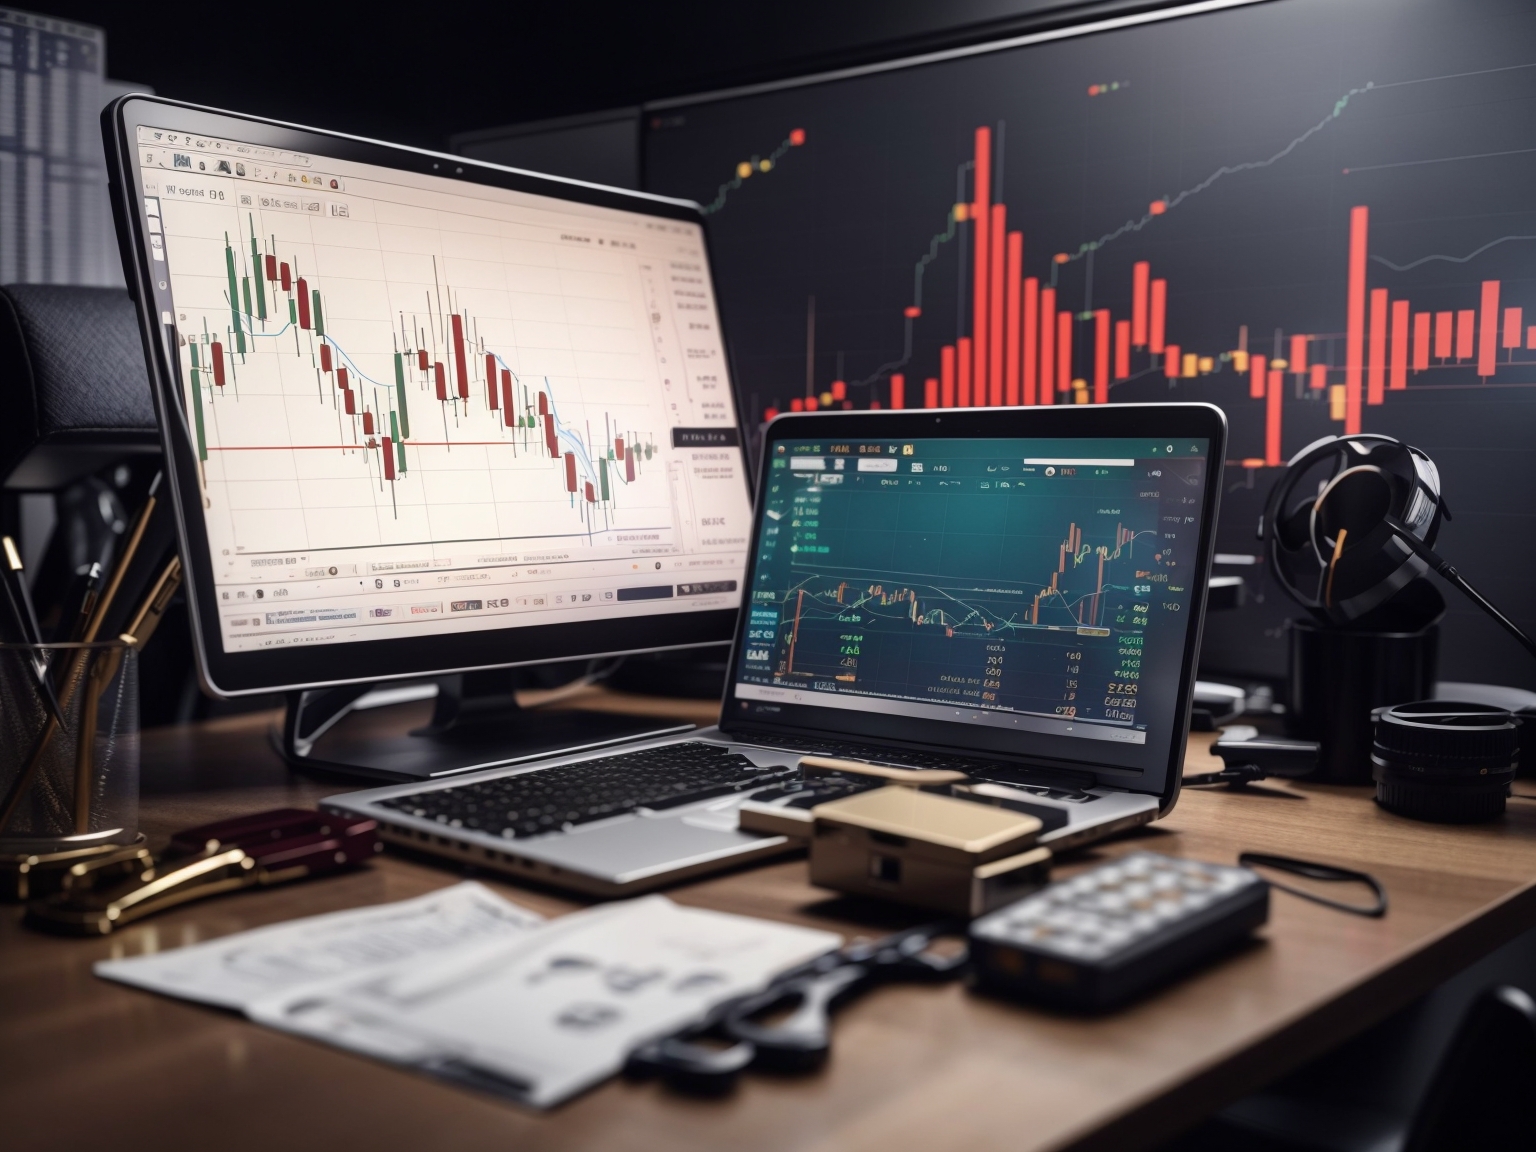 Technical analysis tools